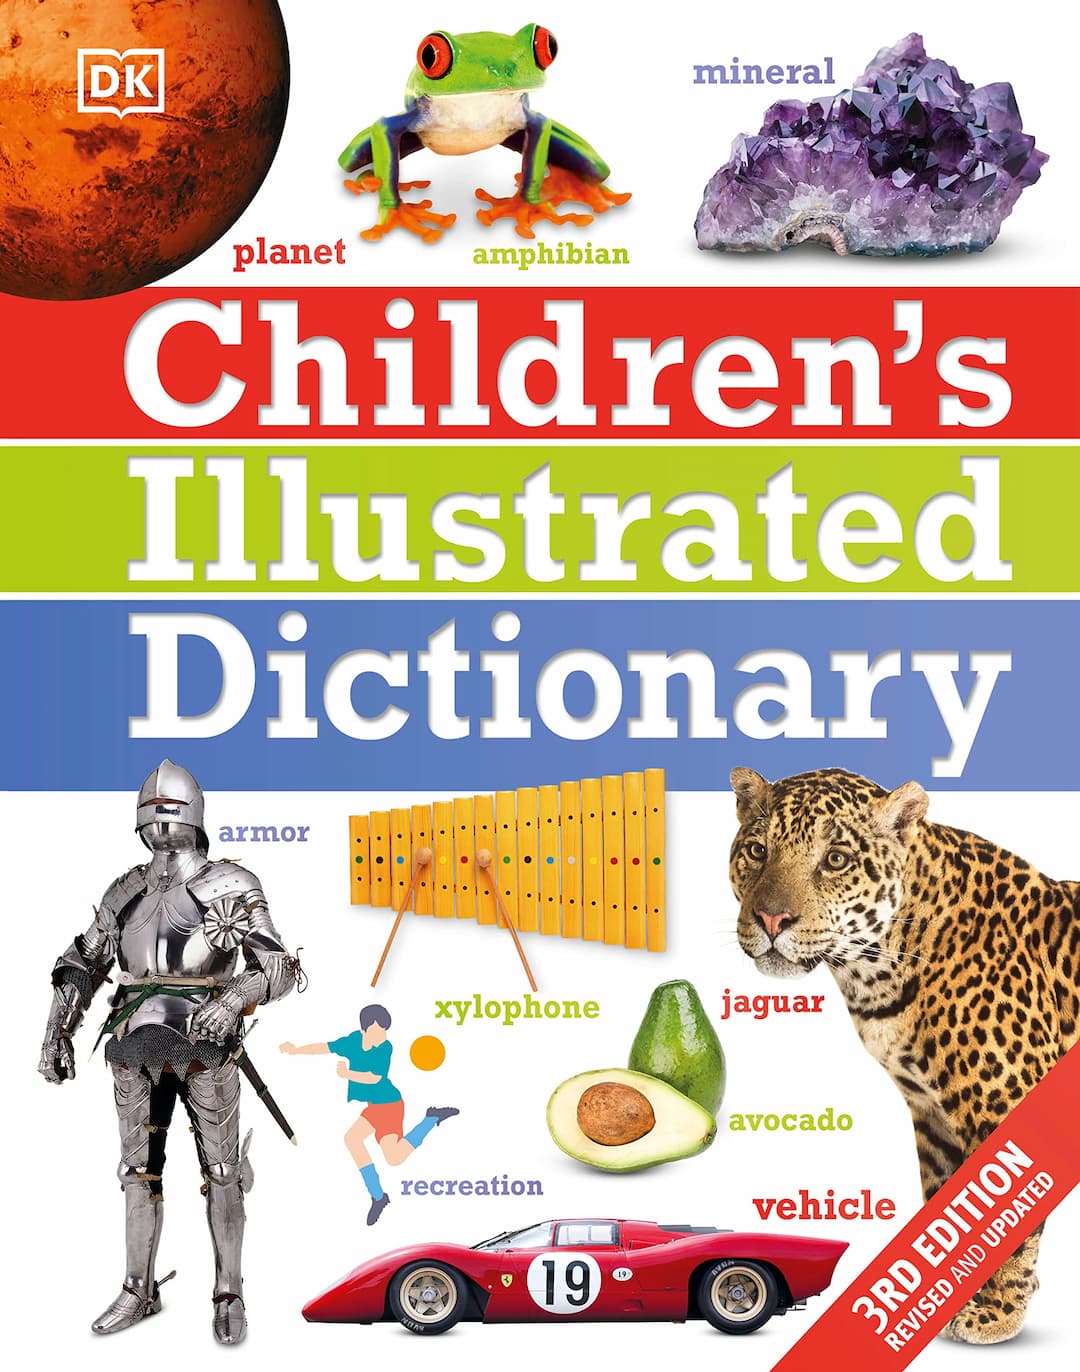 childrens illustrated dictionary pdf free download